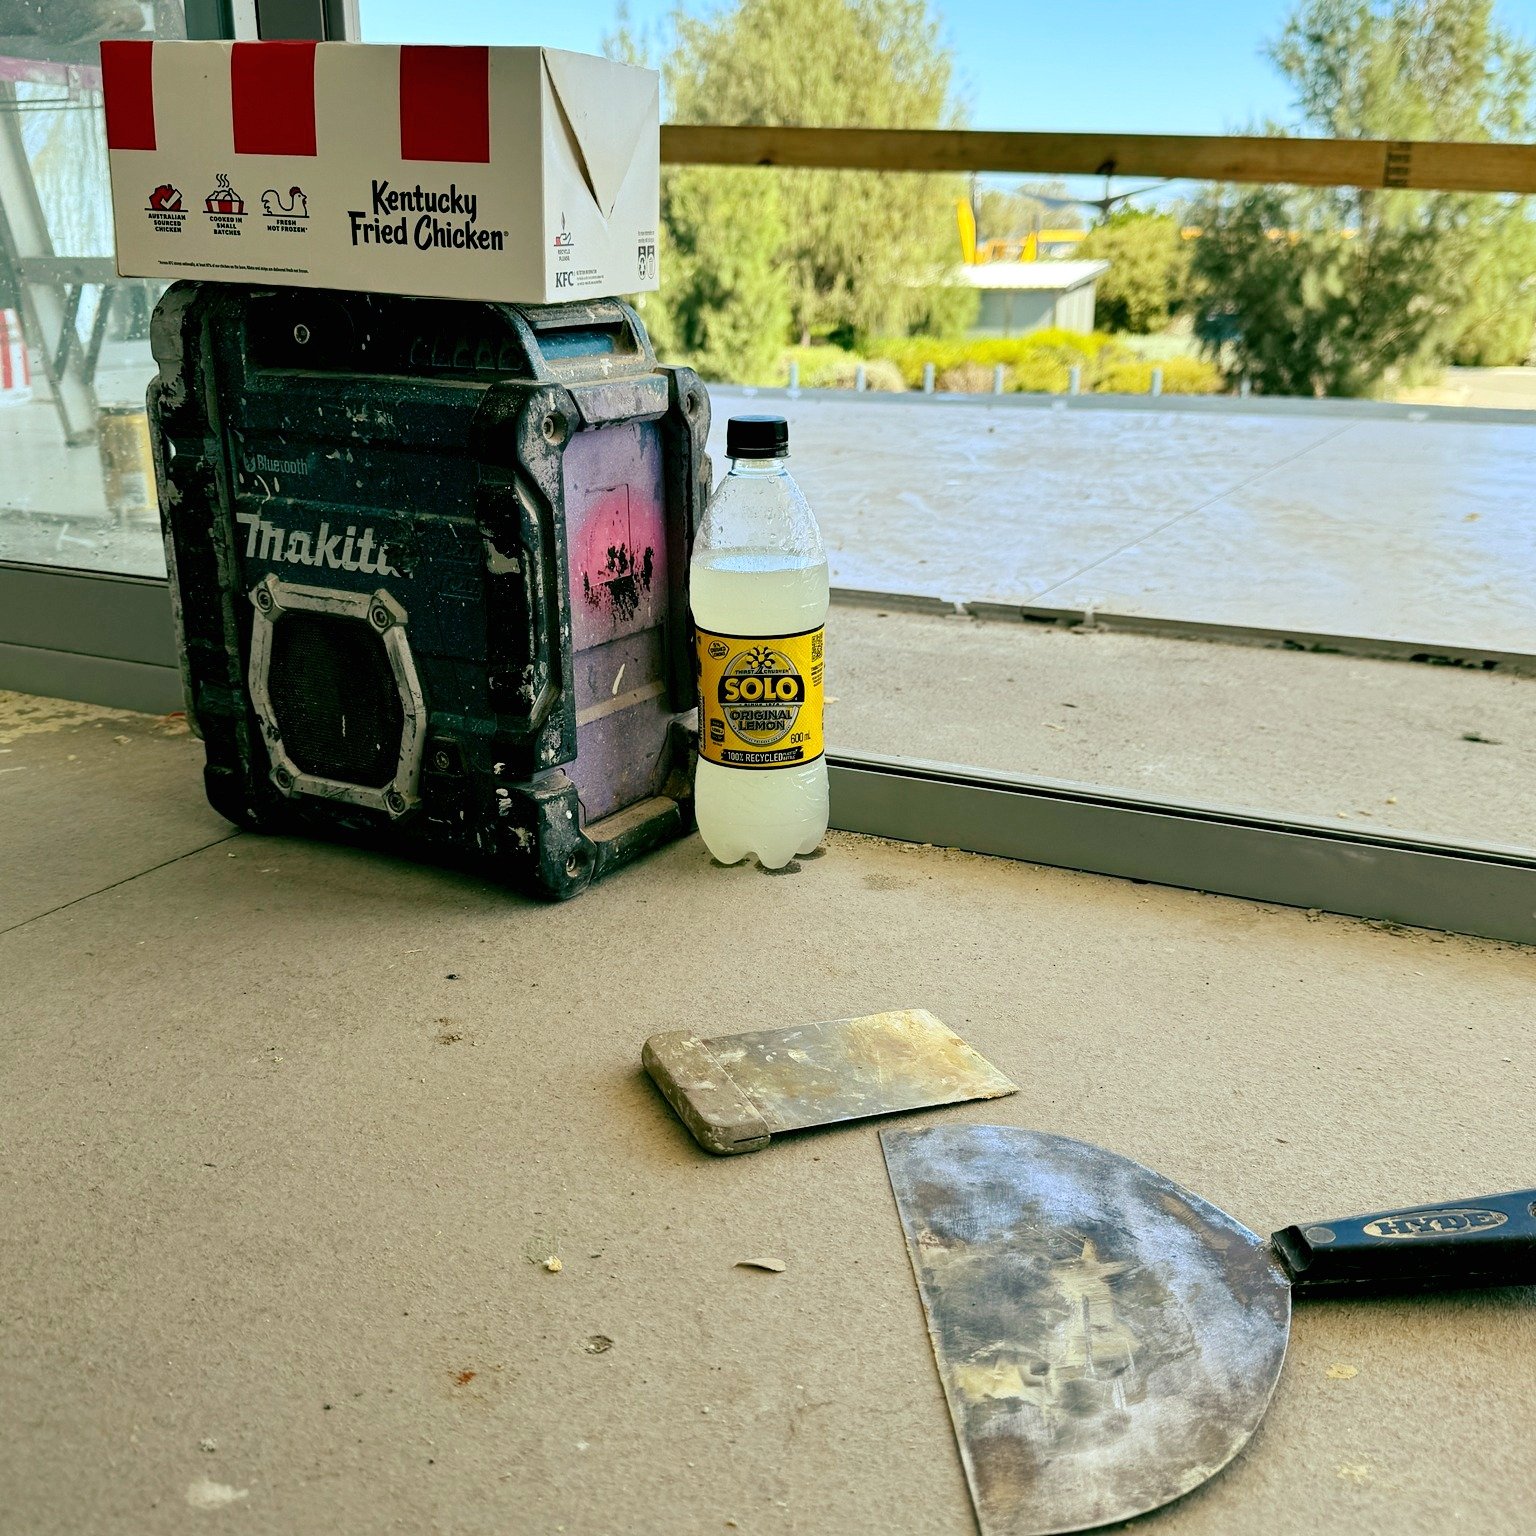 The Painter's Friday survival kit 😆

#cityincolour #paint #painting #paintingcontractor #localsworkingwithlocalsforlocals